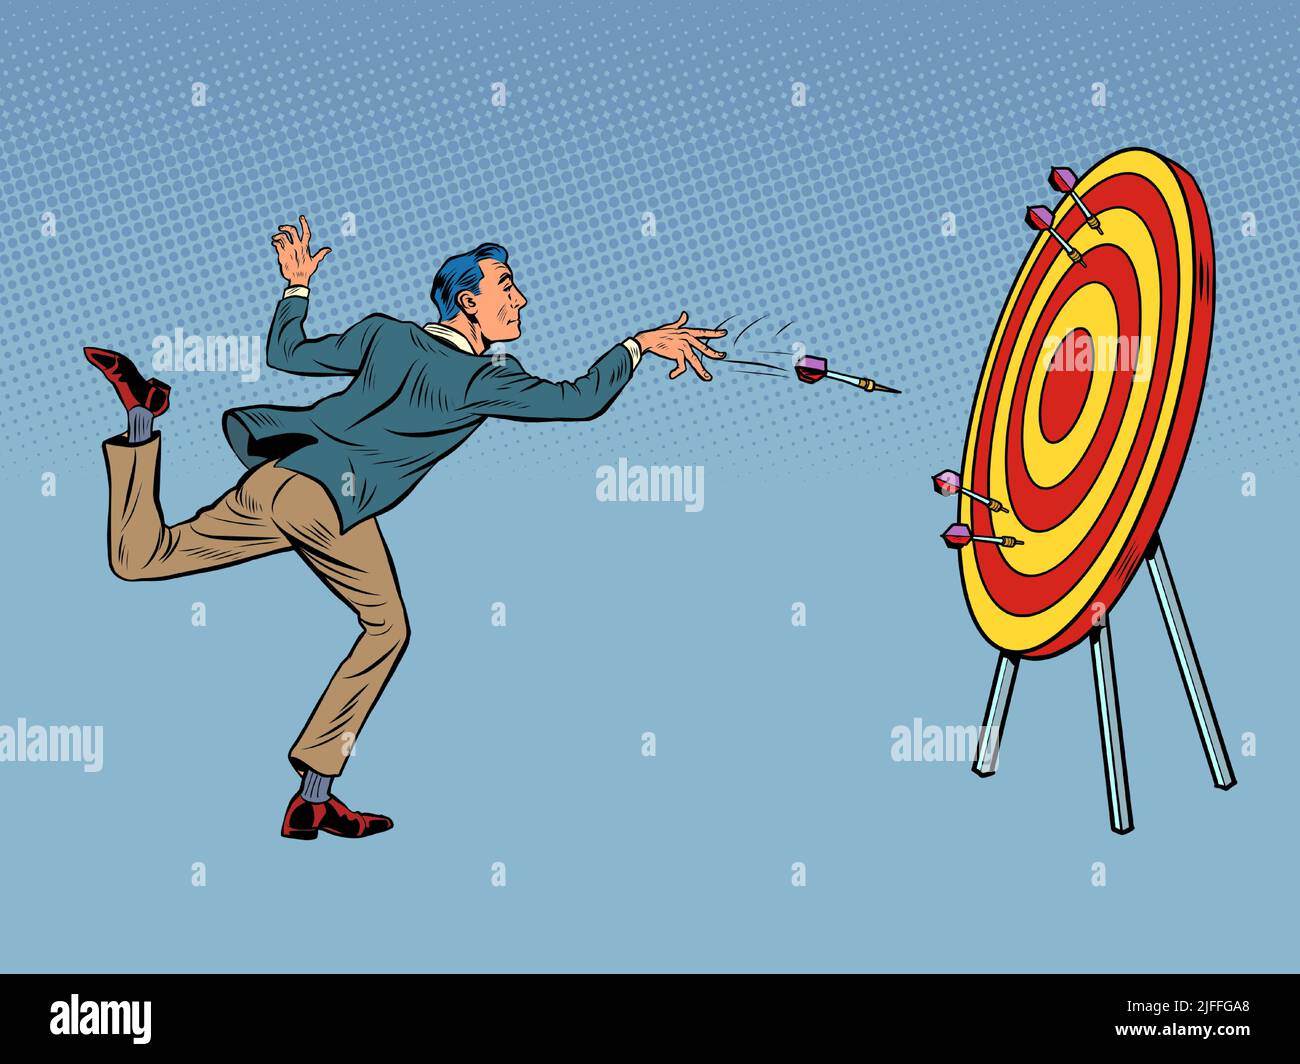 male businessman target dart target accuracy competition, sports fun and recreation. Pop art retro vector illustration comic caricature 50s 60s style Stock Vector